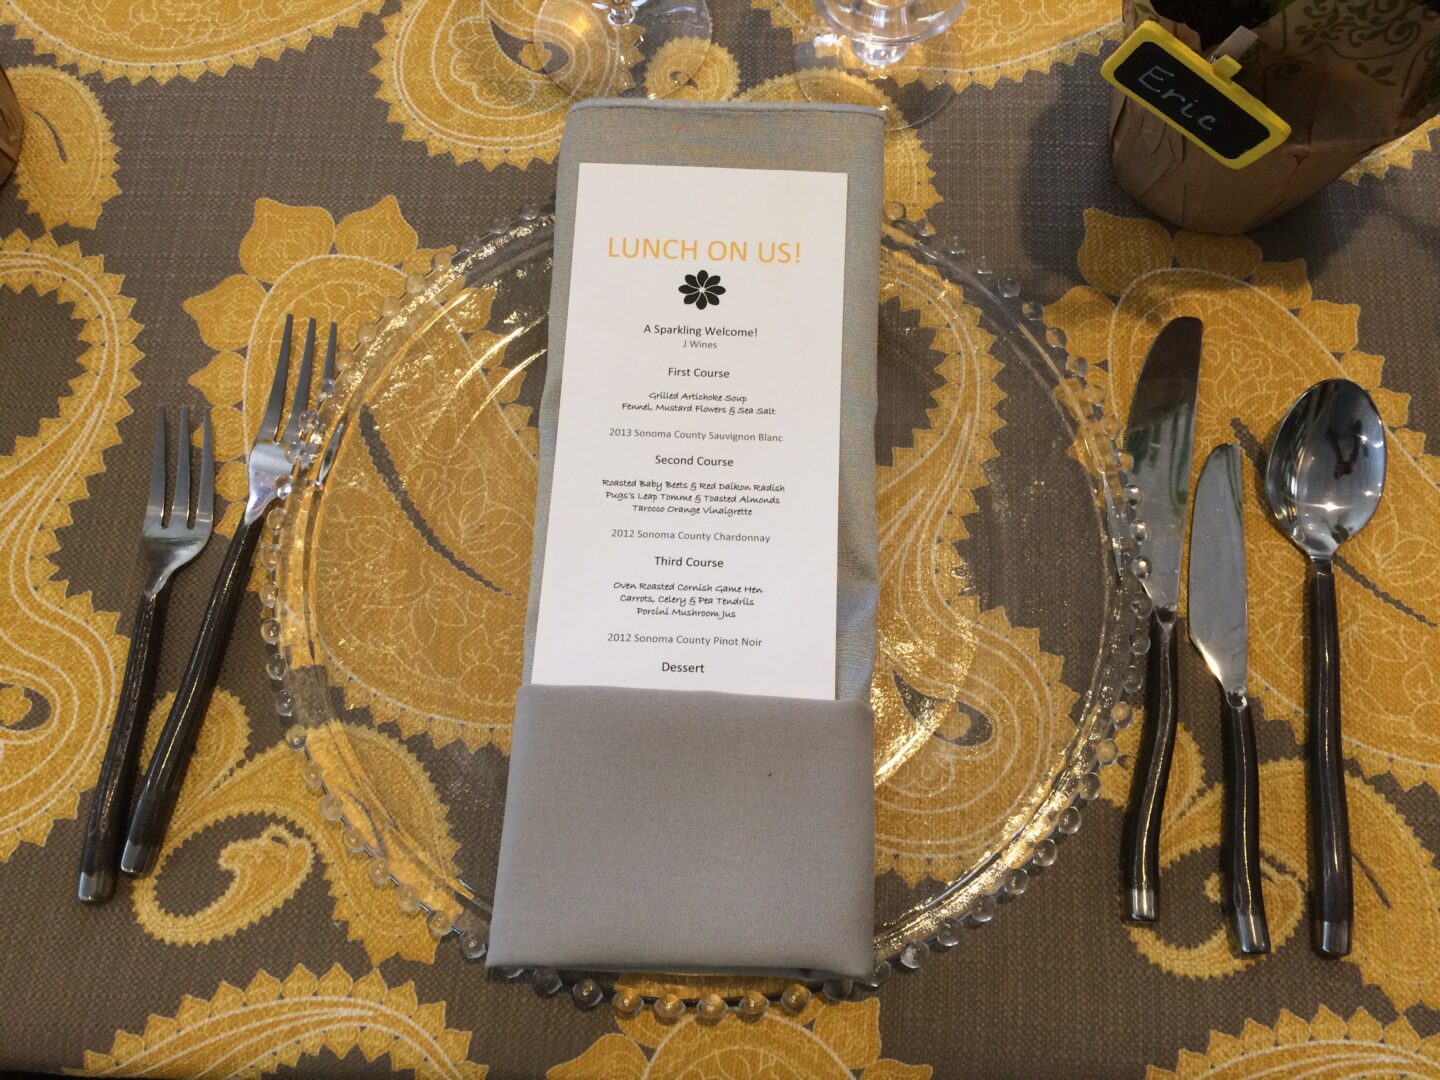 A place setting with a menu and silverware.